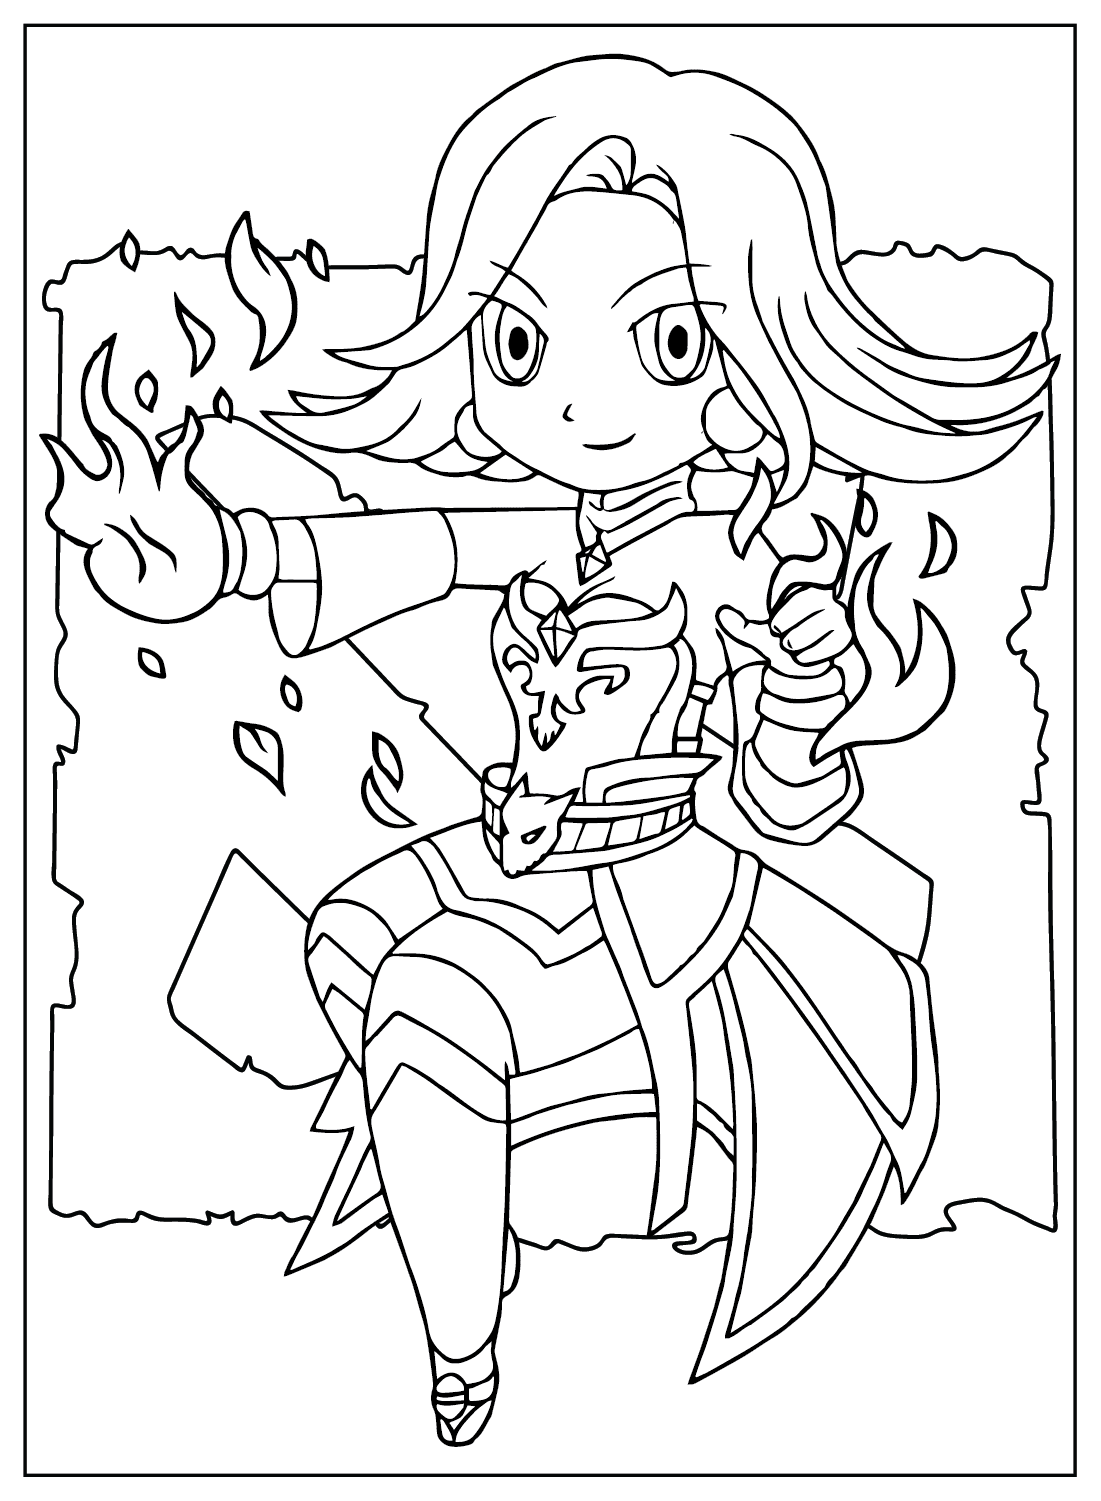 Lina Coloring Page from Dota 2